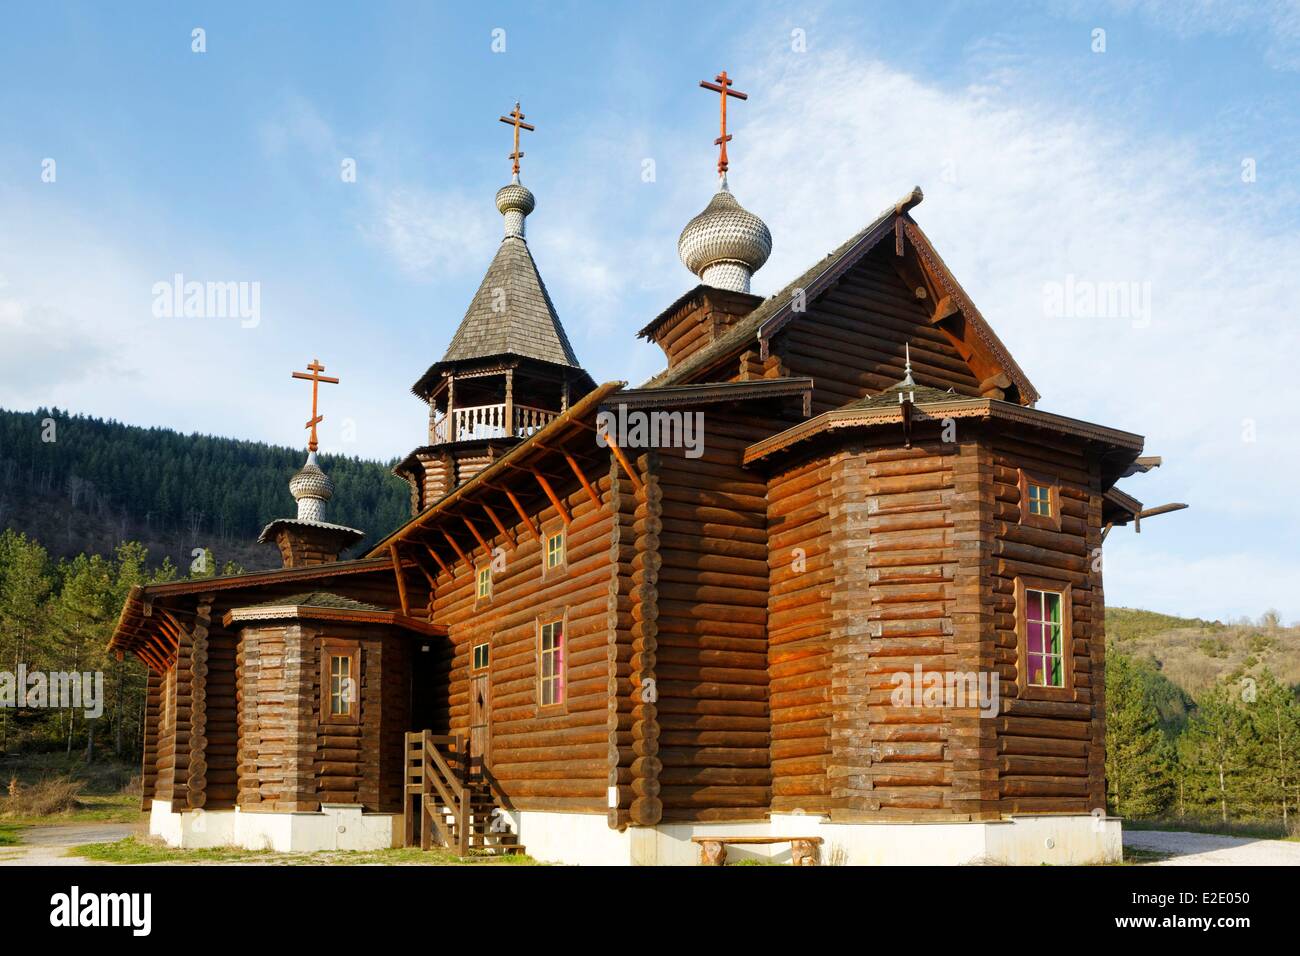 France Aveyron eglise russe russian church nearby Sylvanes Midi Pyrennees France Europe Stock Photo